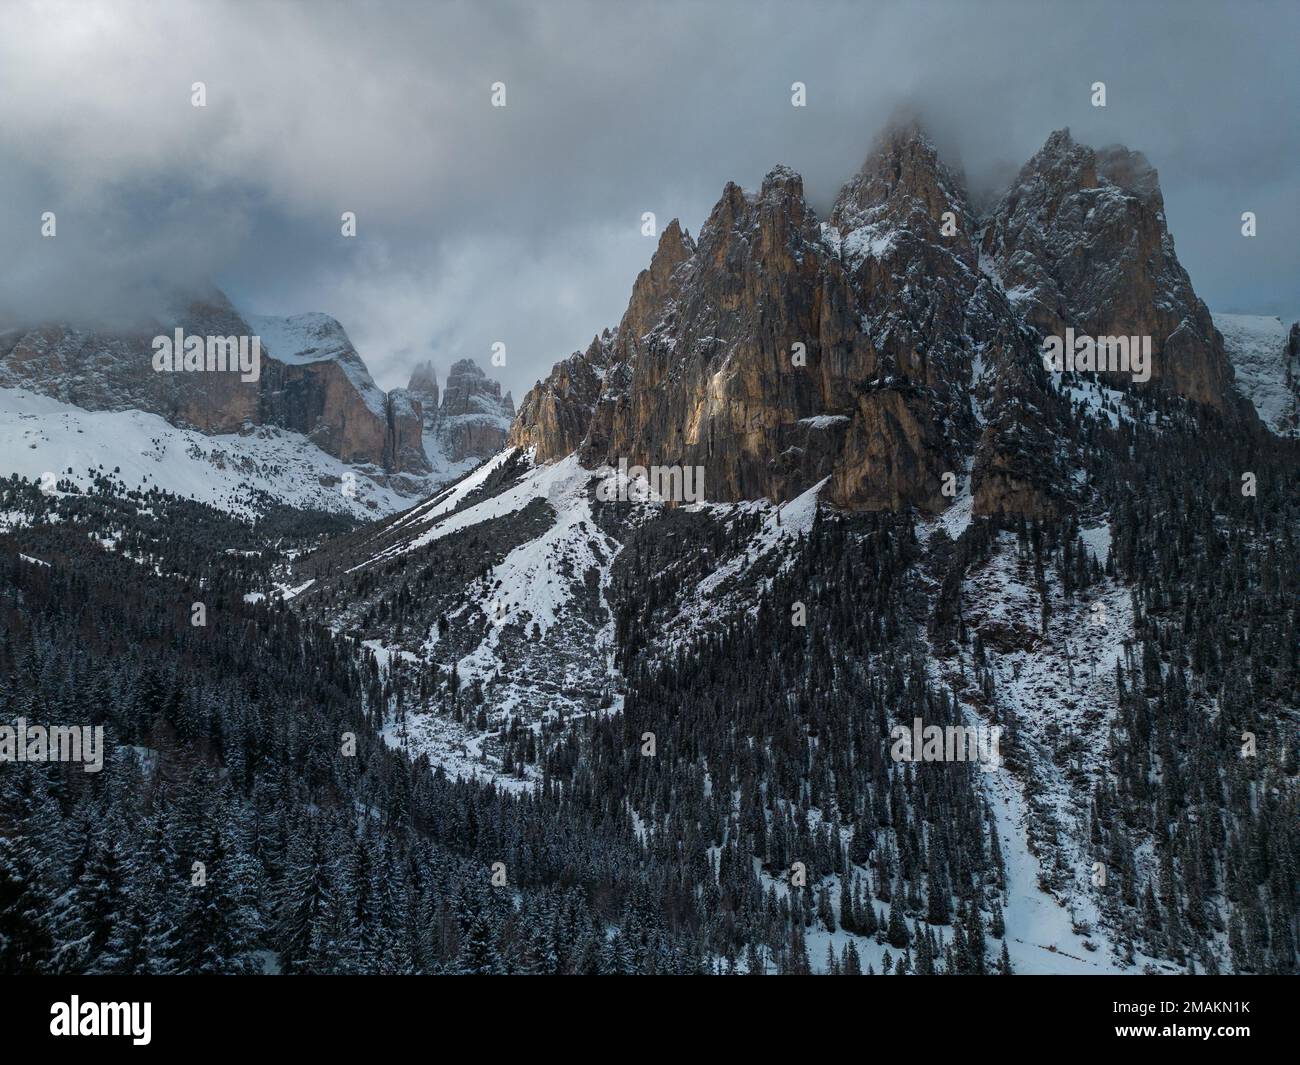 A drone aerial shot of Rosengarten Group massif (or Rose Garden massif) at Vigo di Fassa, in the Dolomites of northern Italy at sunset in winter. Stock Photo